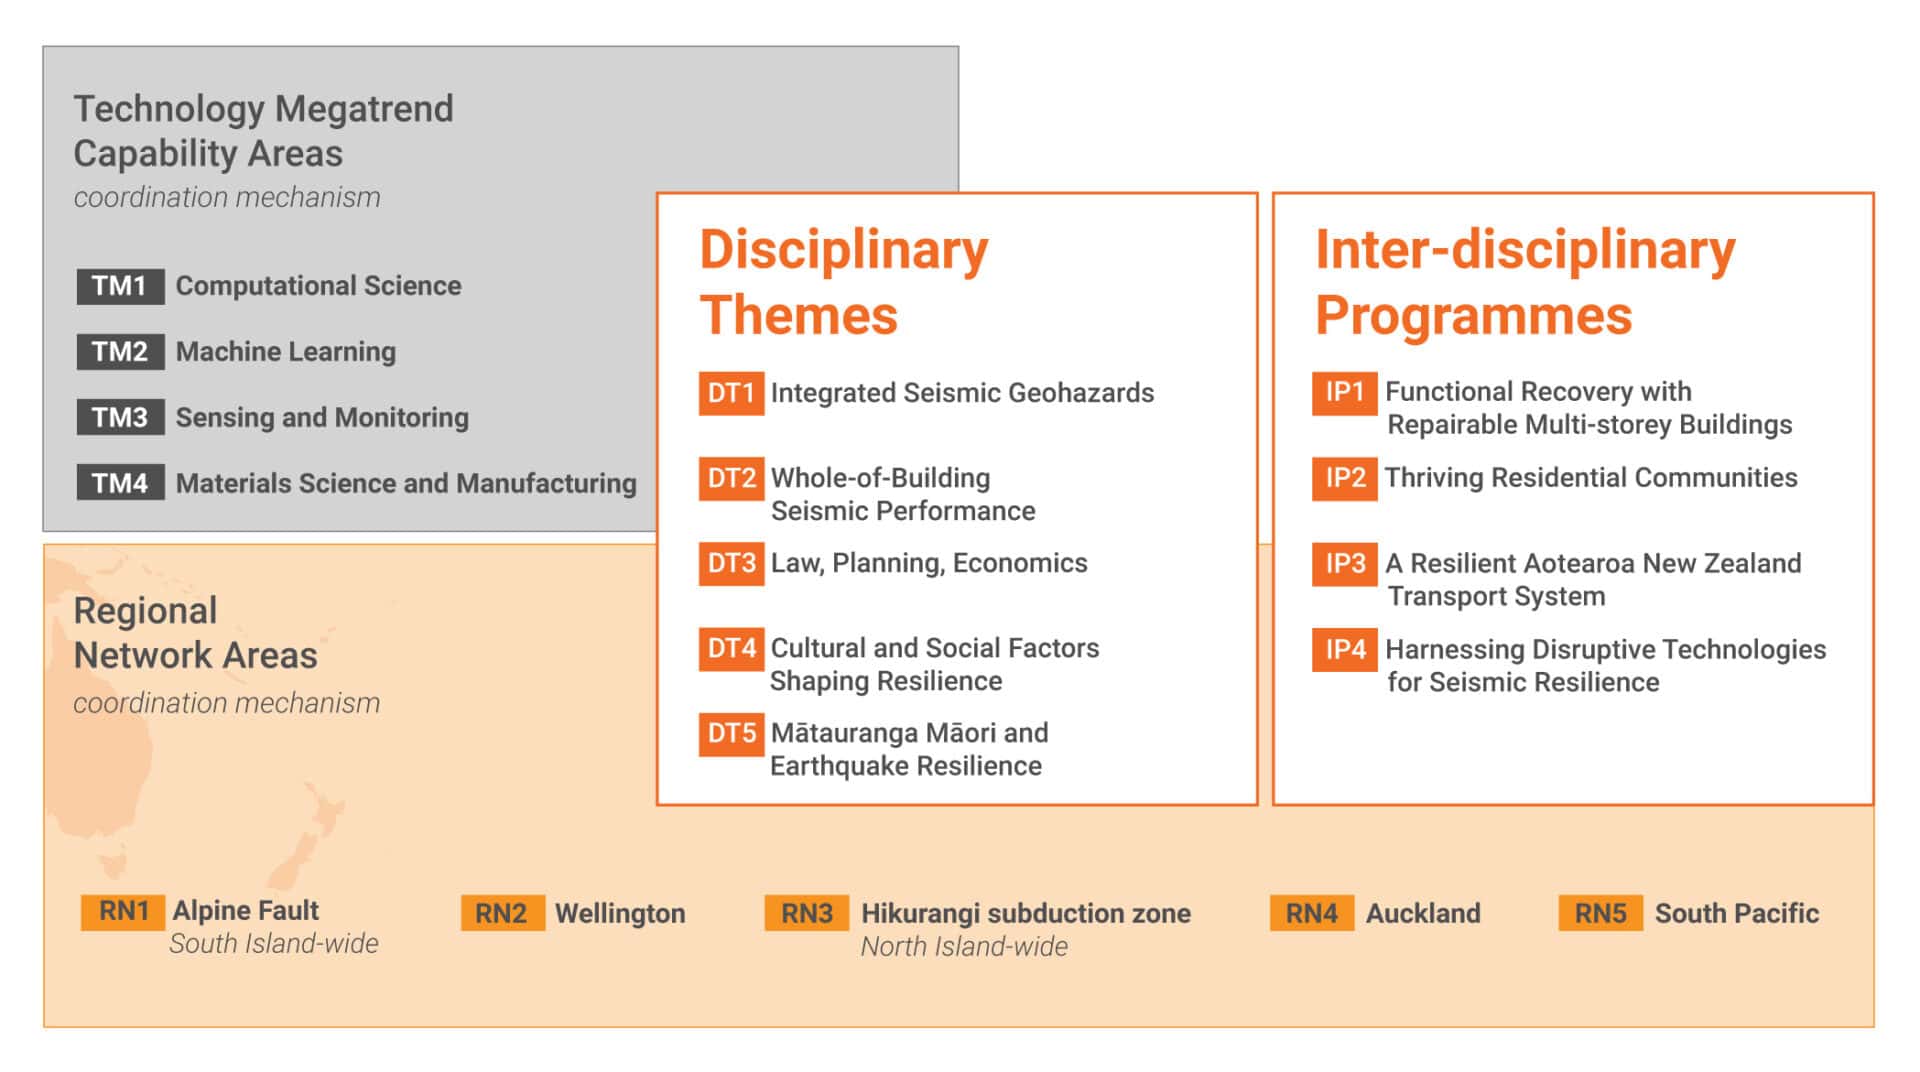 QuakeCoRE's Research Programme Diagram showing the various Disciplinary Themes, Interdisciplinary Programmes, Regional Network Areas and Technology Megatrends.